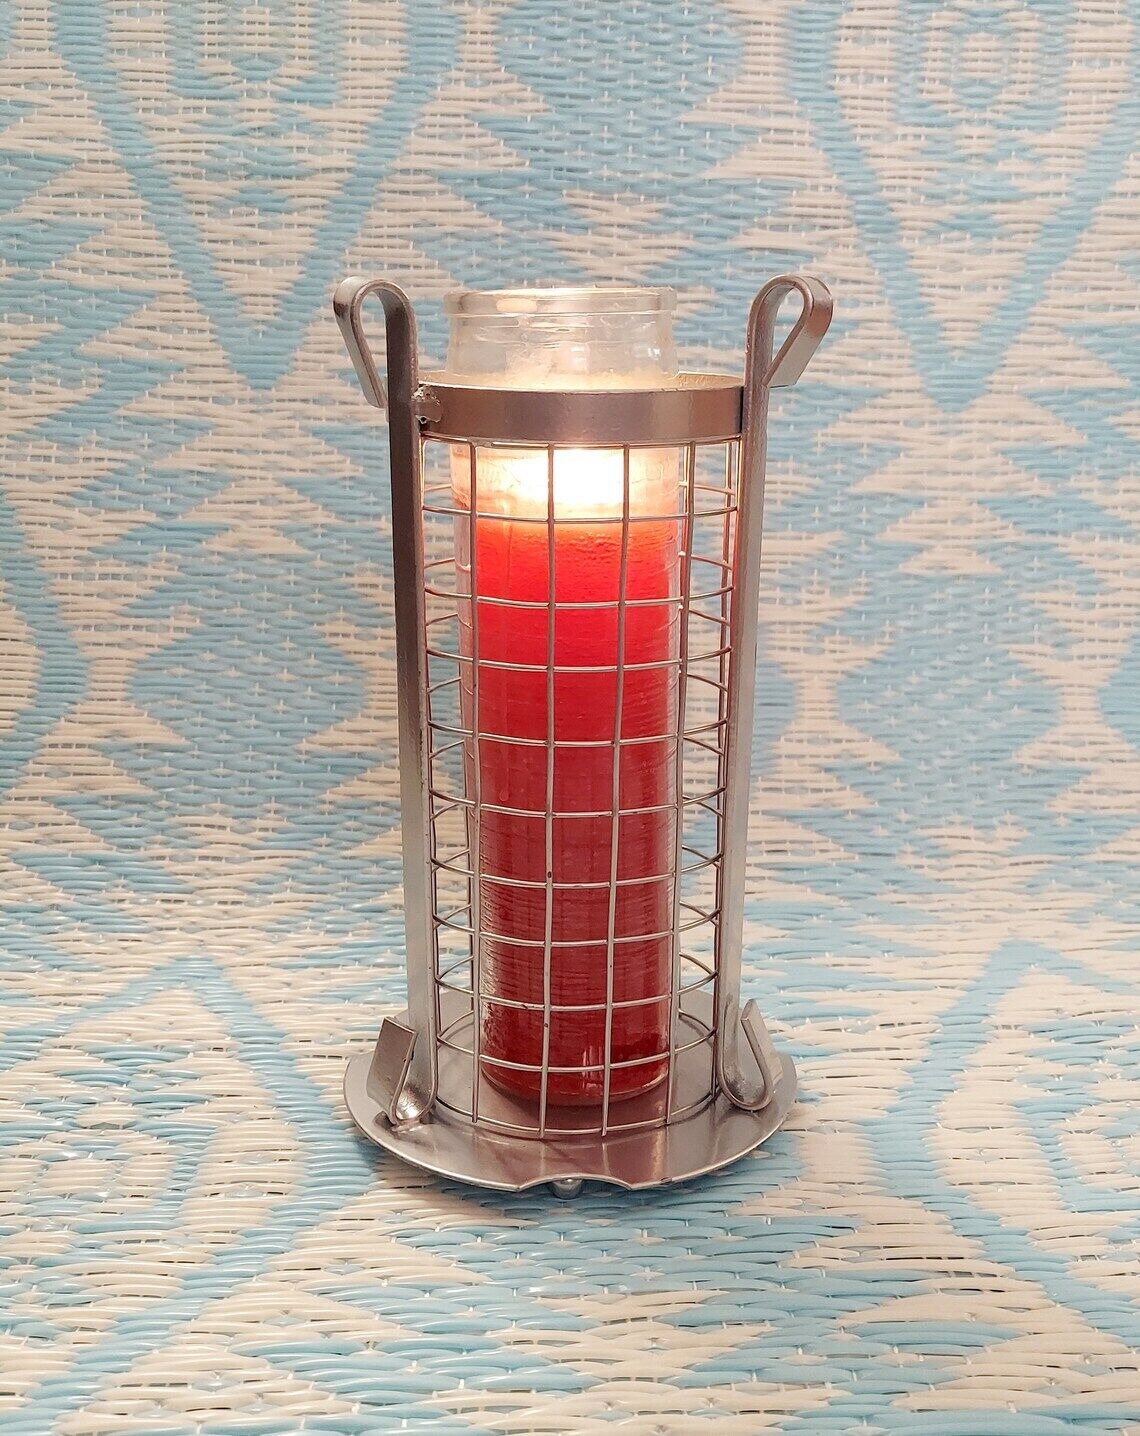 7 Day Candle holder metal safety fire proof seven day glass vela container votiv